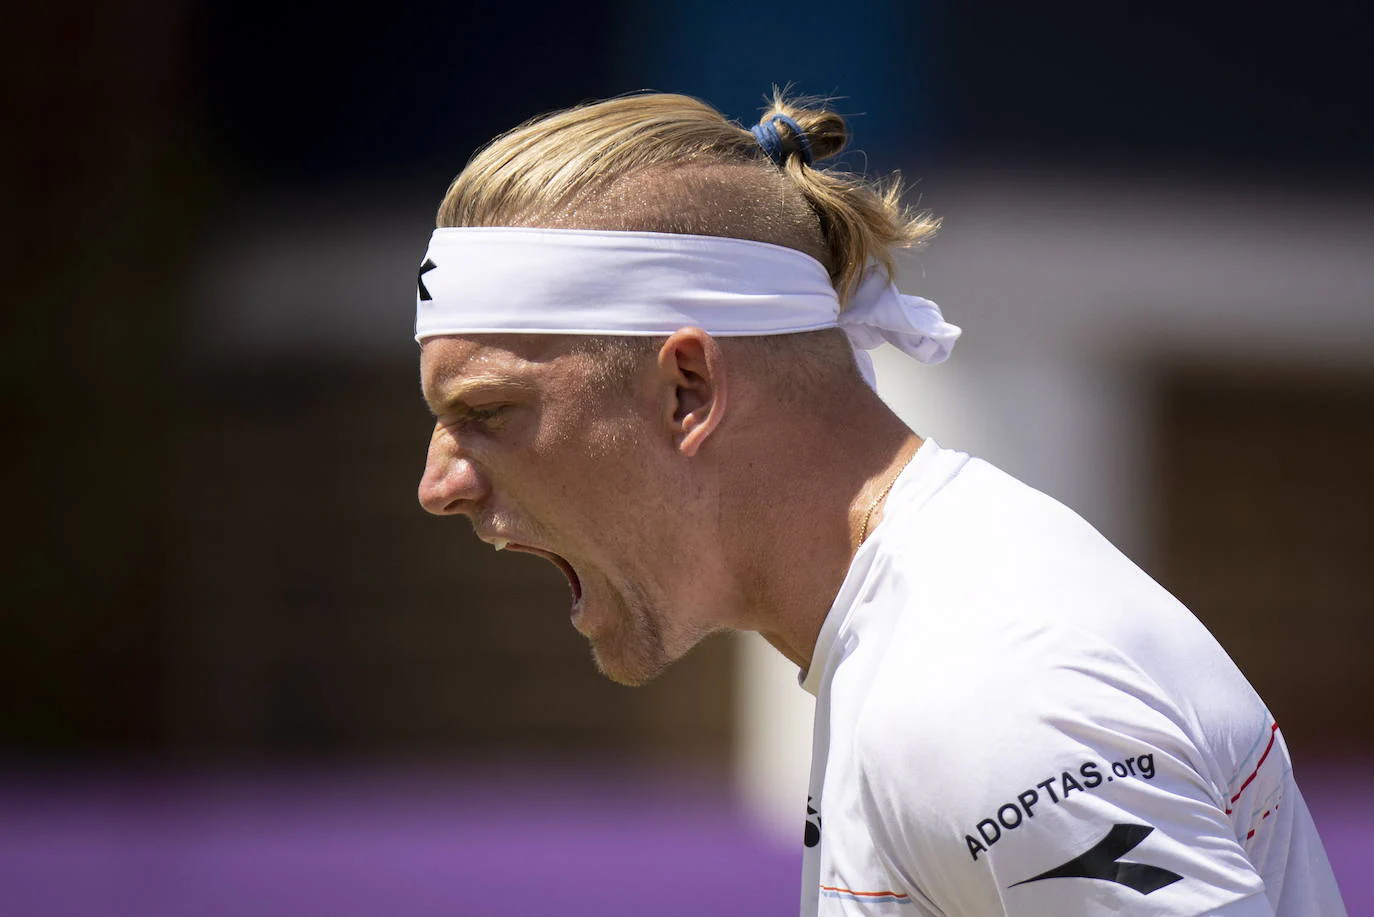 An injured Davidovich retires from Eastbourne tennis